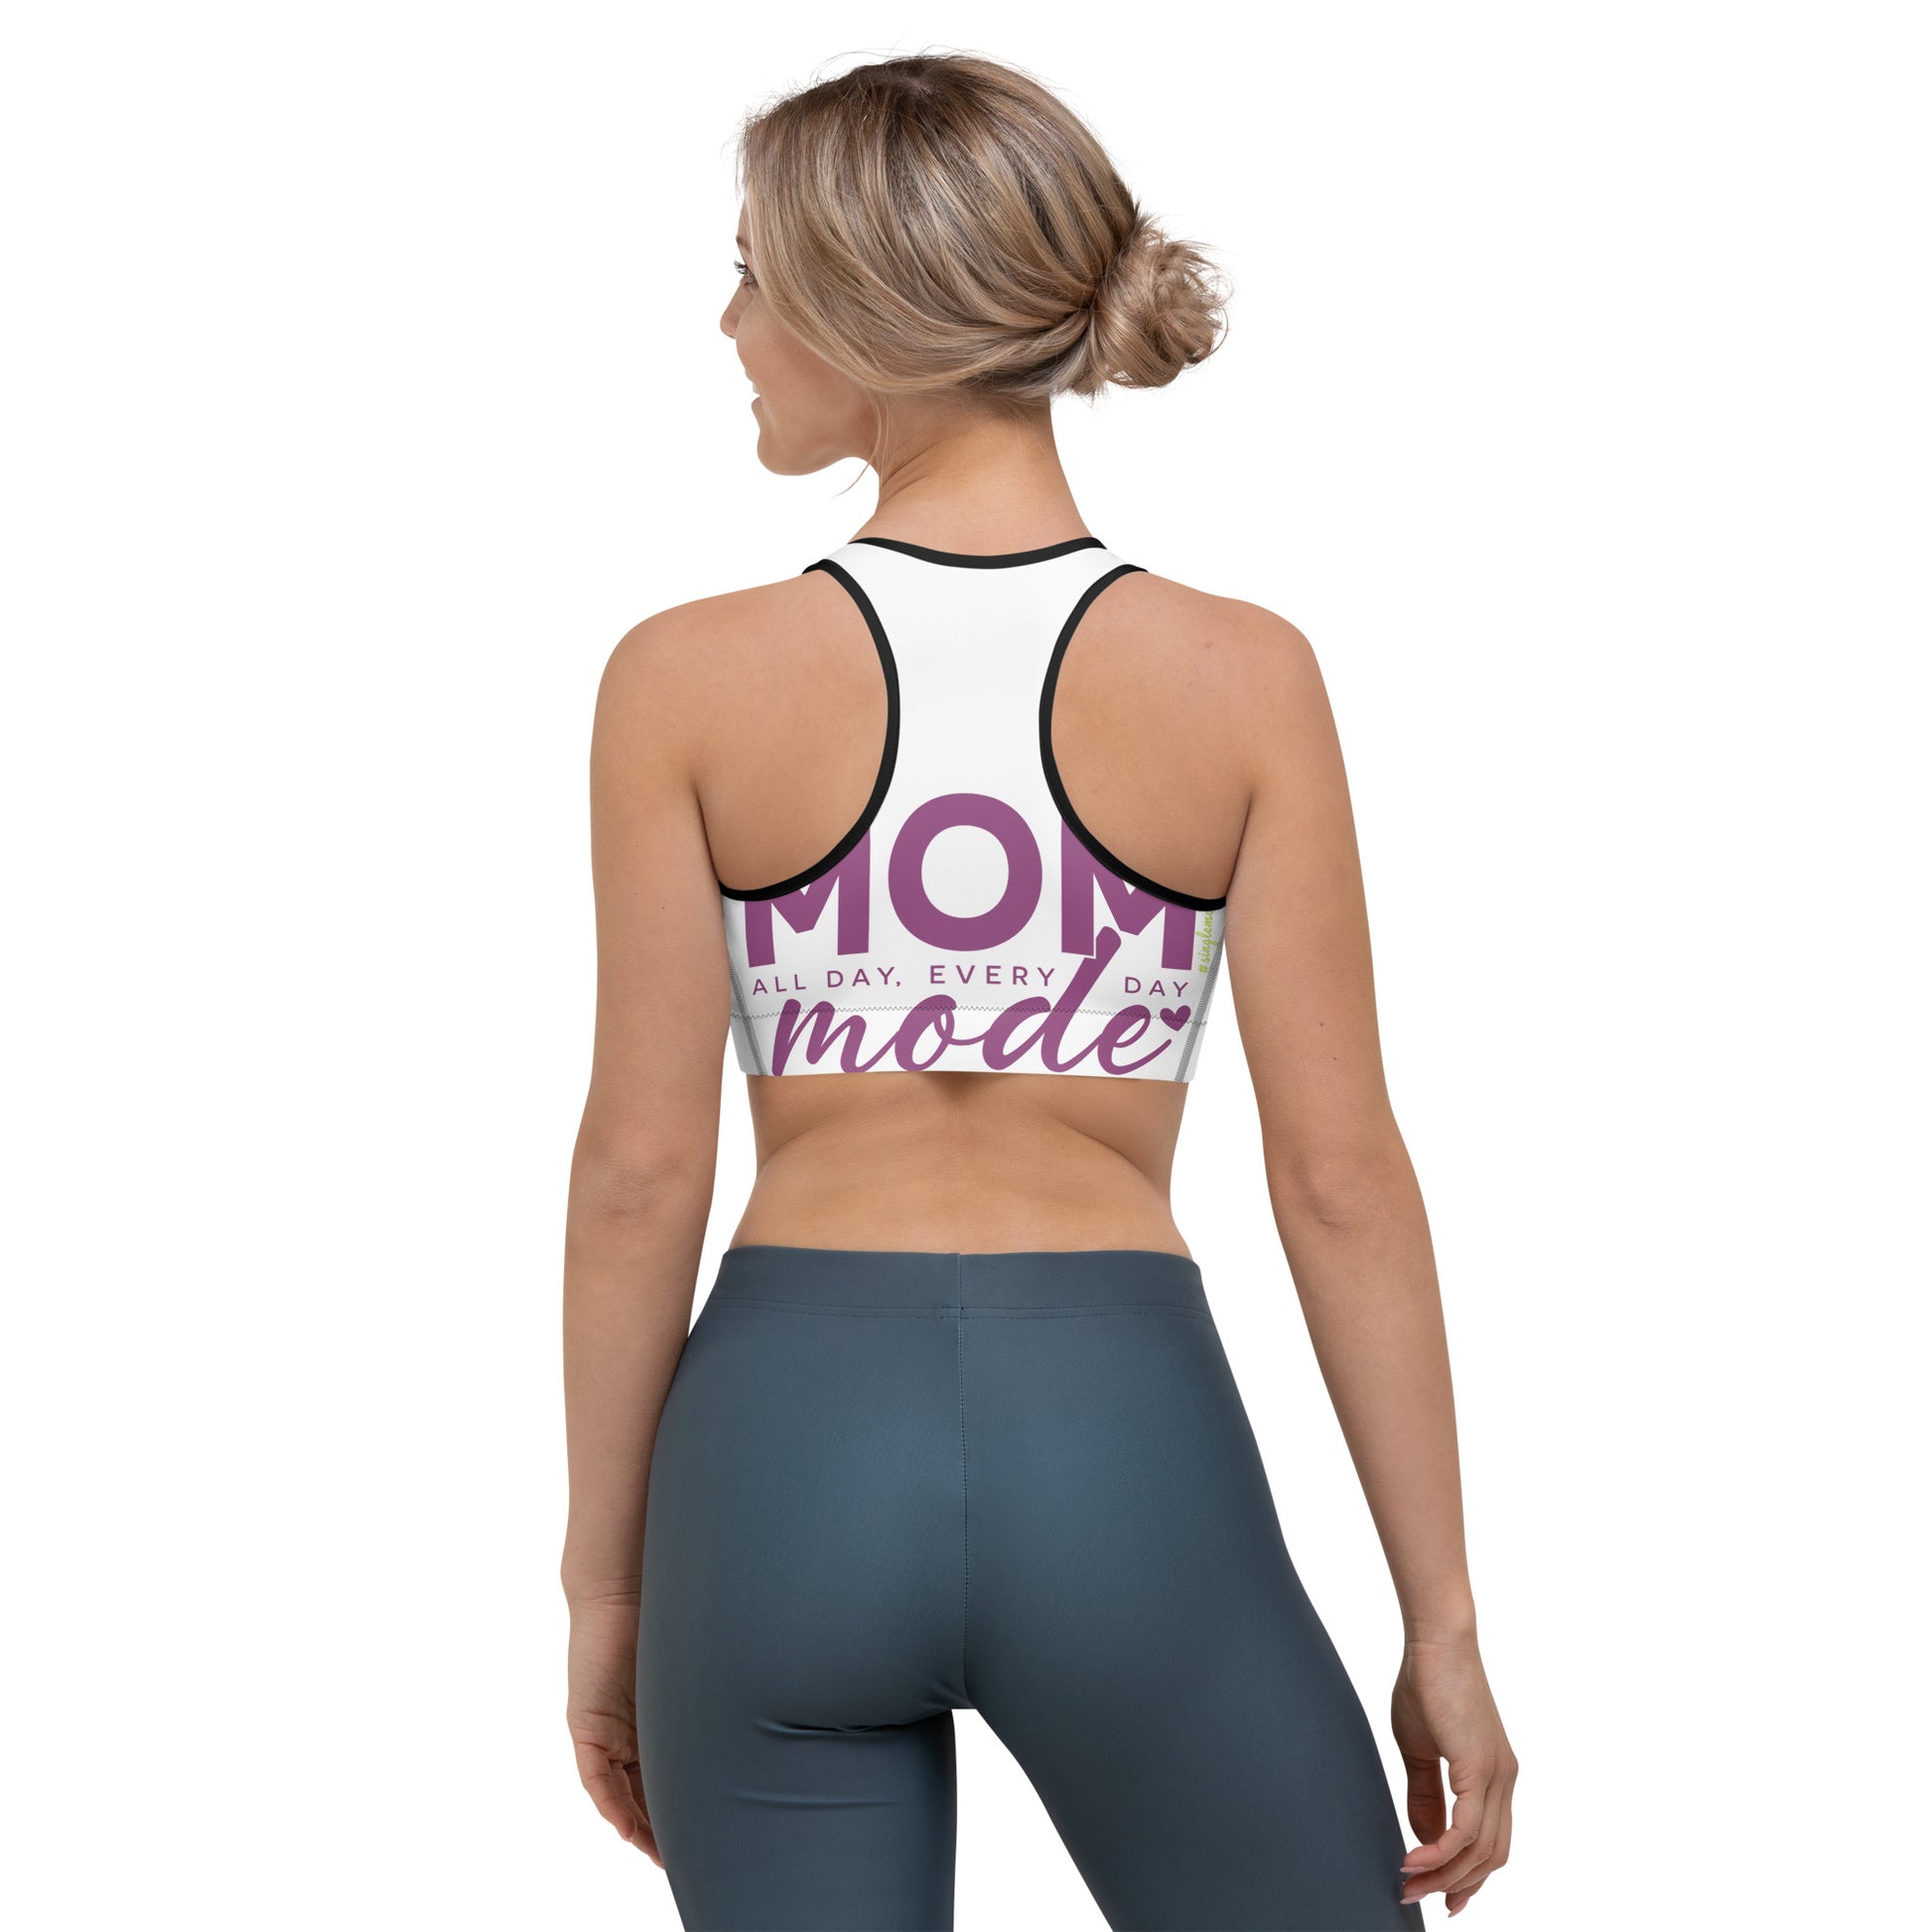 Sports Bra (Adult) – Mommy inspire me